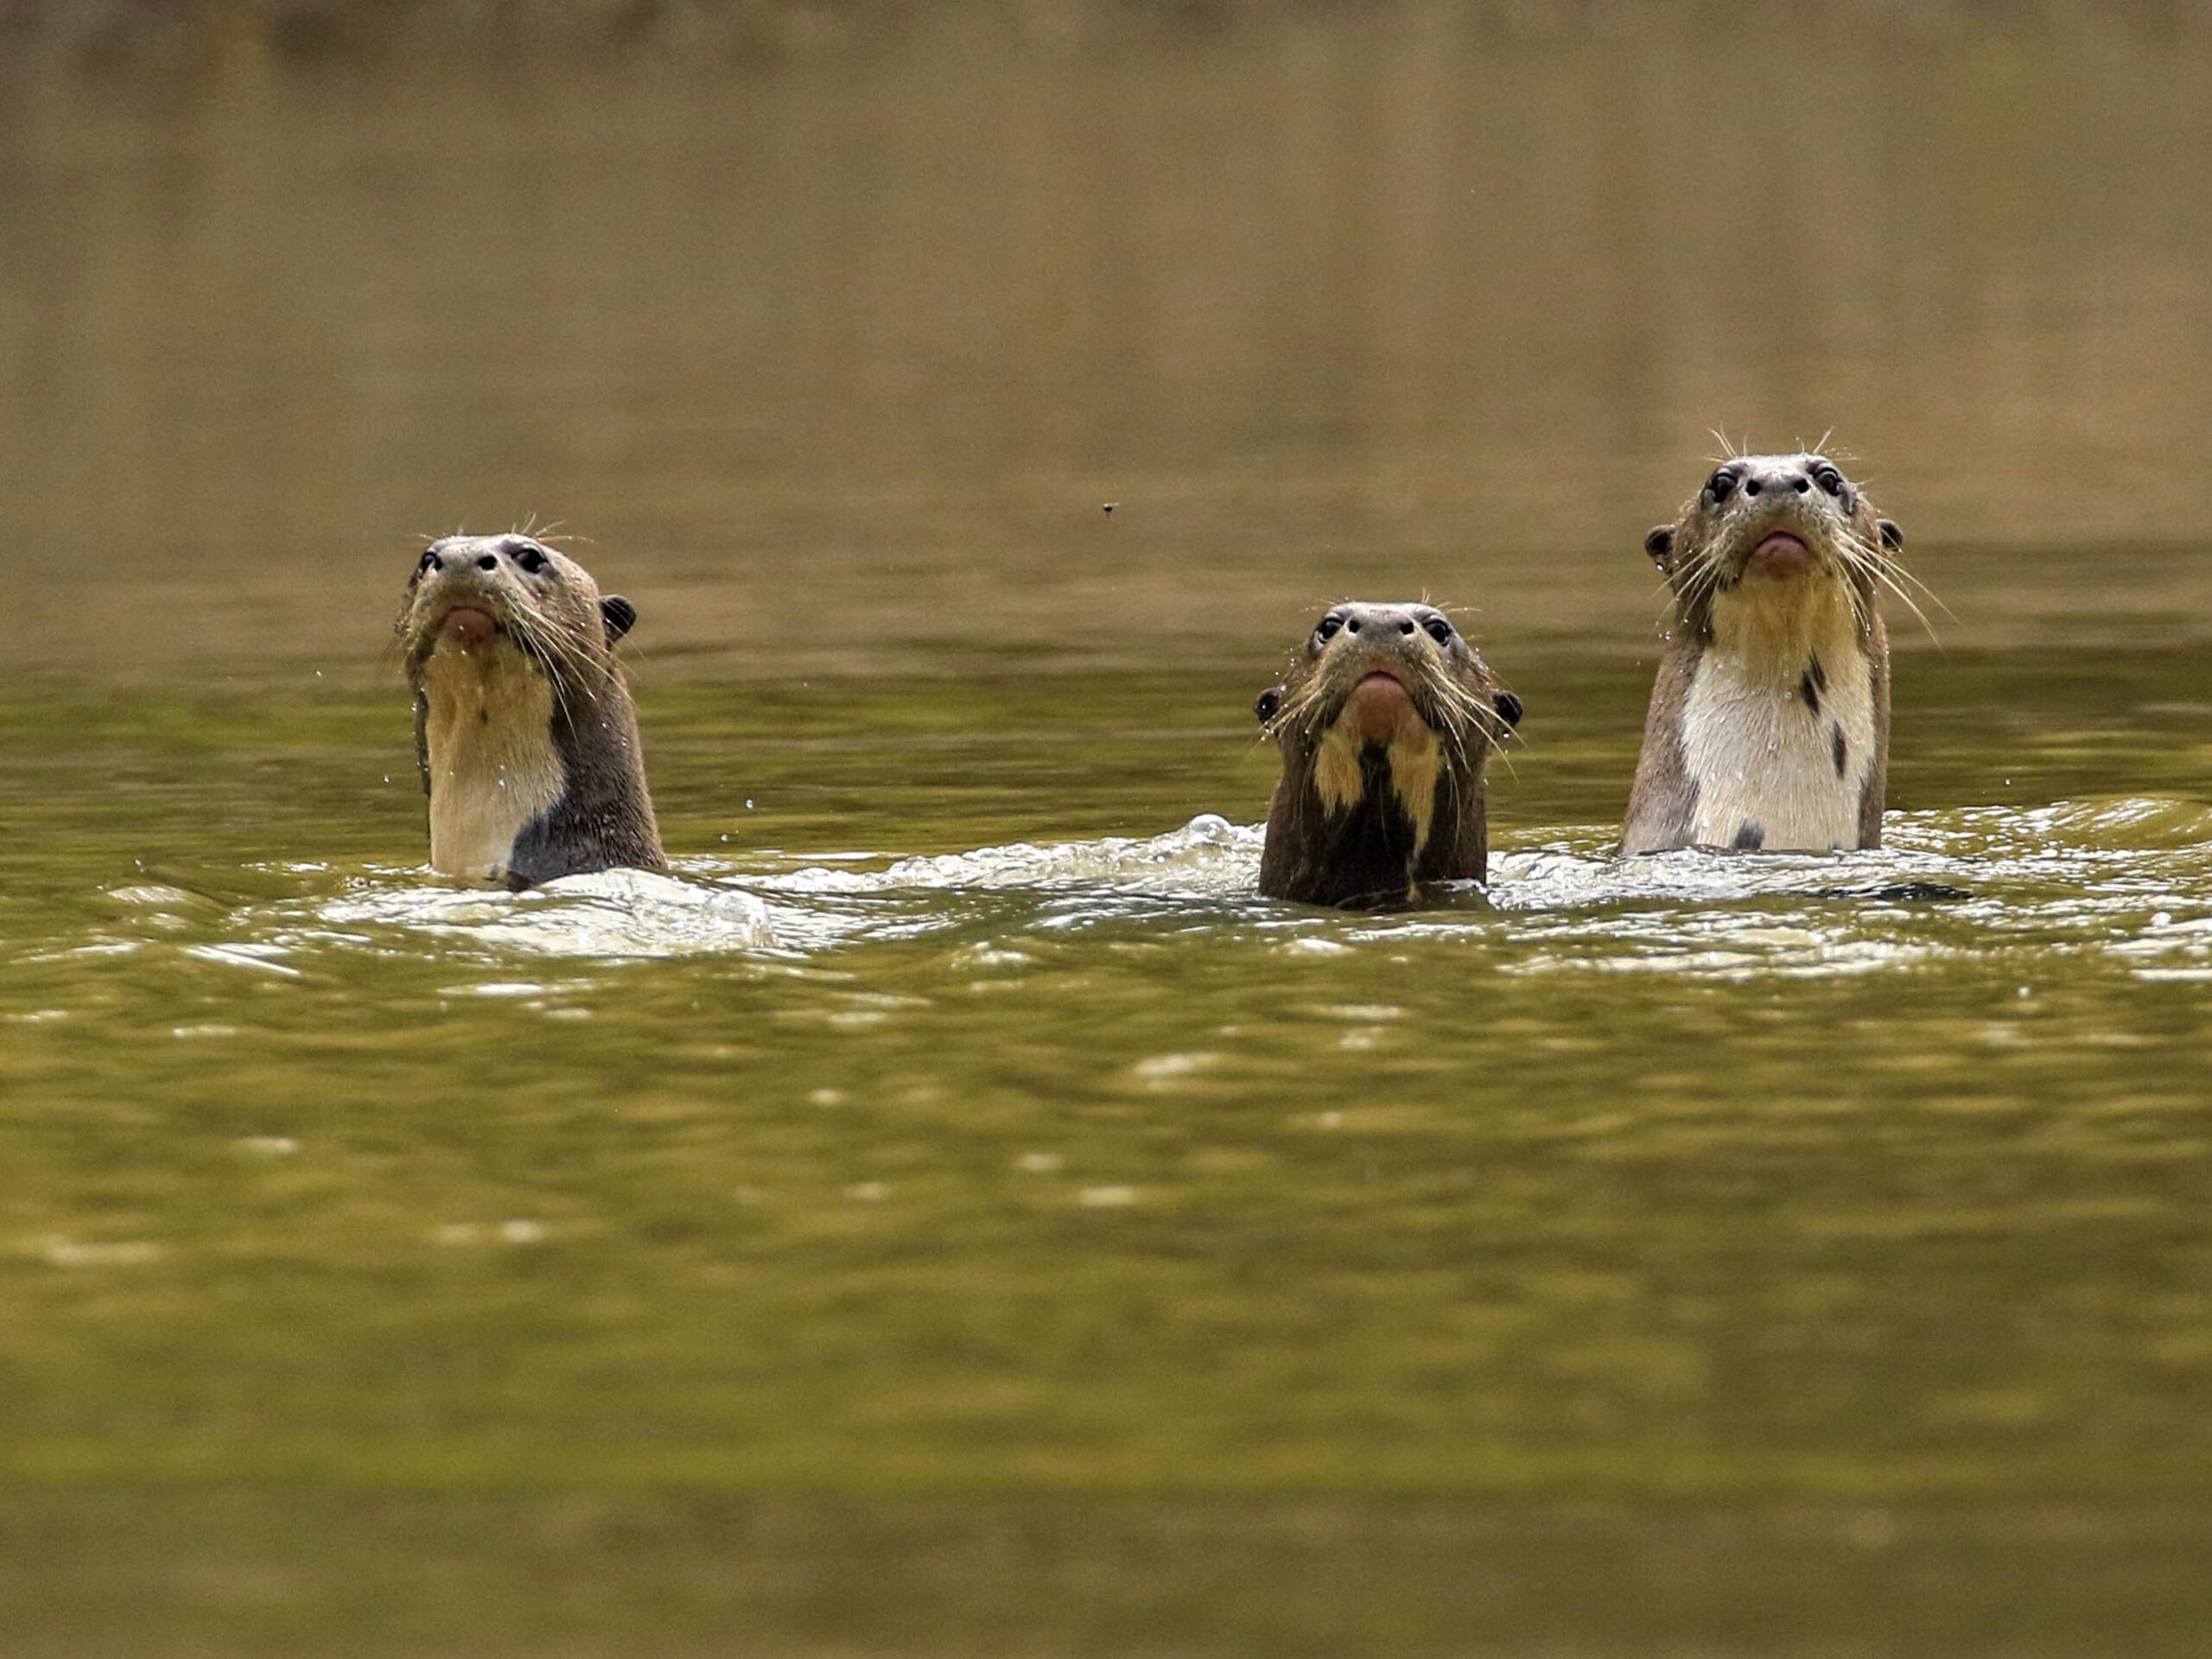 Giant river otters in Ecuador